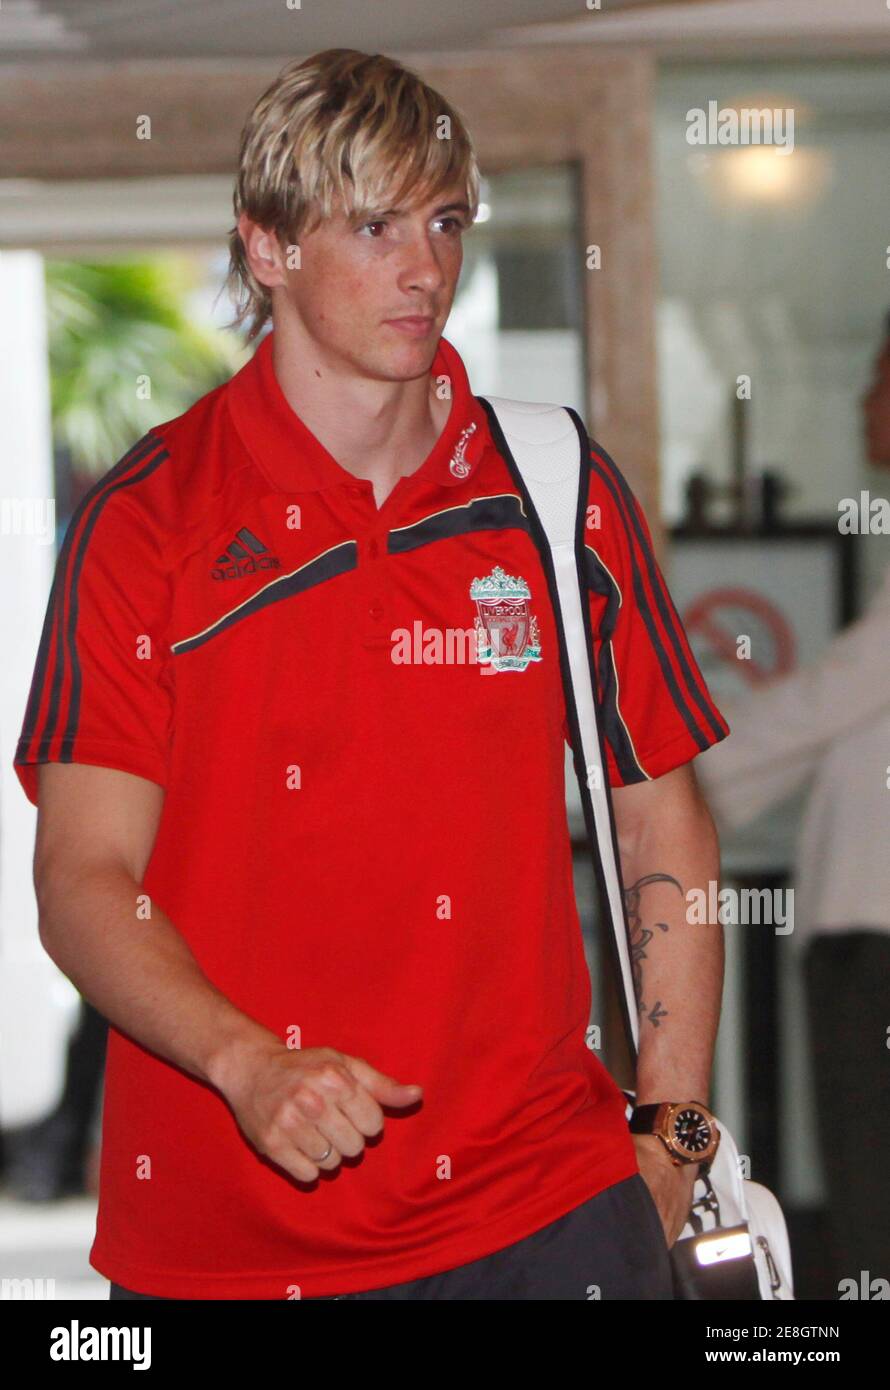 Liverpool's player Fernando Torres arrives at a hotel in Bangkok July 20, 2009.  Liverpool will play Thailand in an exhibition match on Wednesday.  REUTERS/Chaiwat Subprasom  (THAILAND SPORT SOCCER) Stock Photo